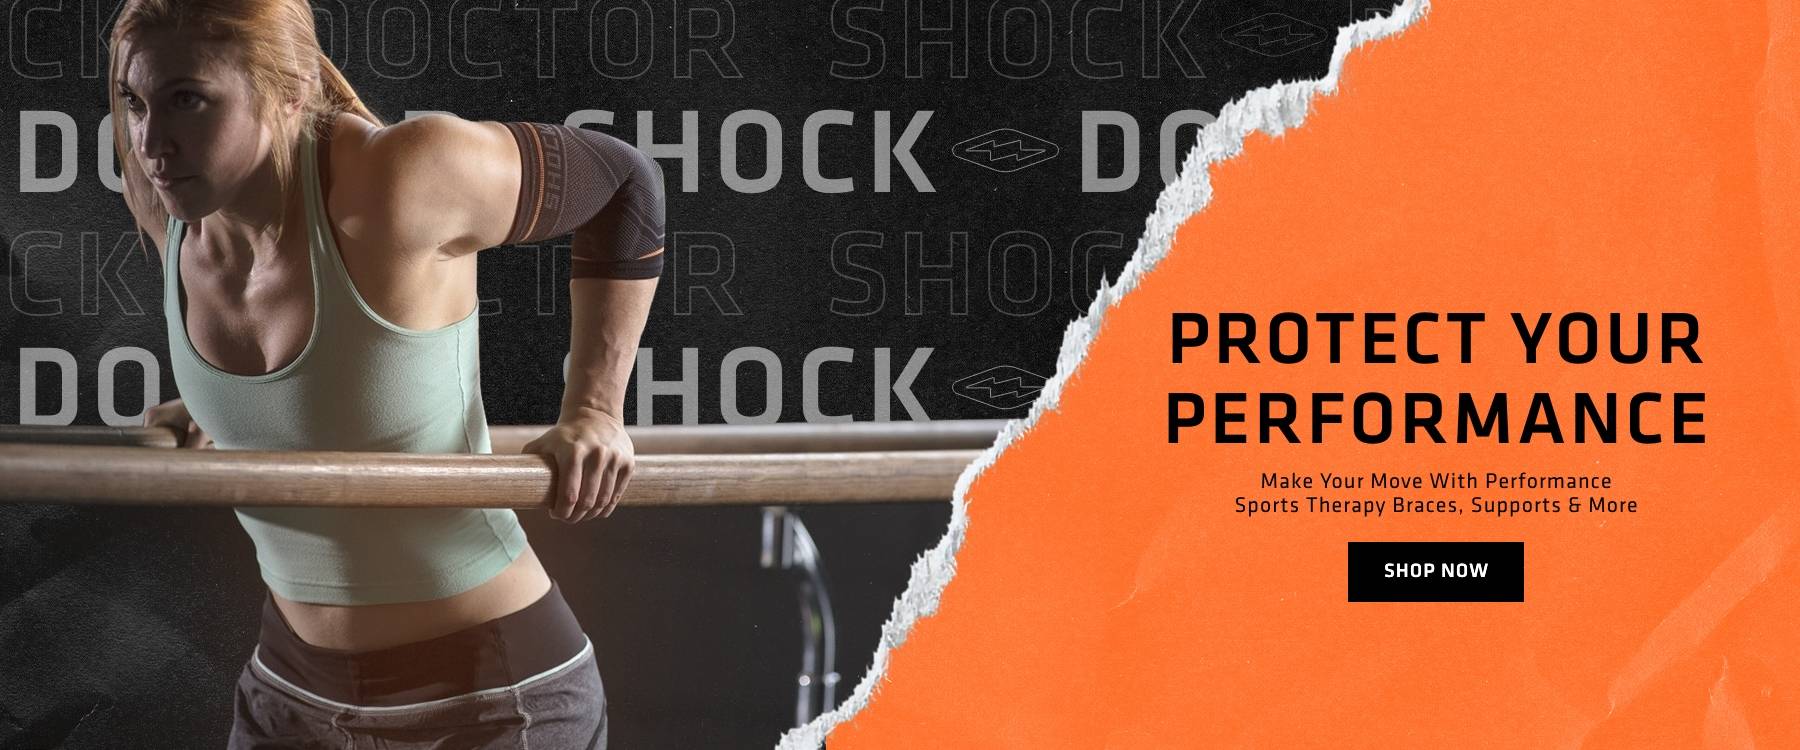 Protect Your Performance - Make Your Move With Performance Sports Therapy braces, Supports & More - Shop Now